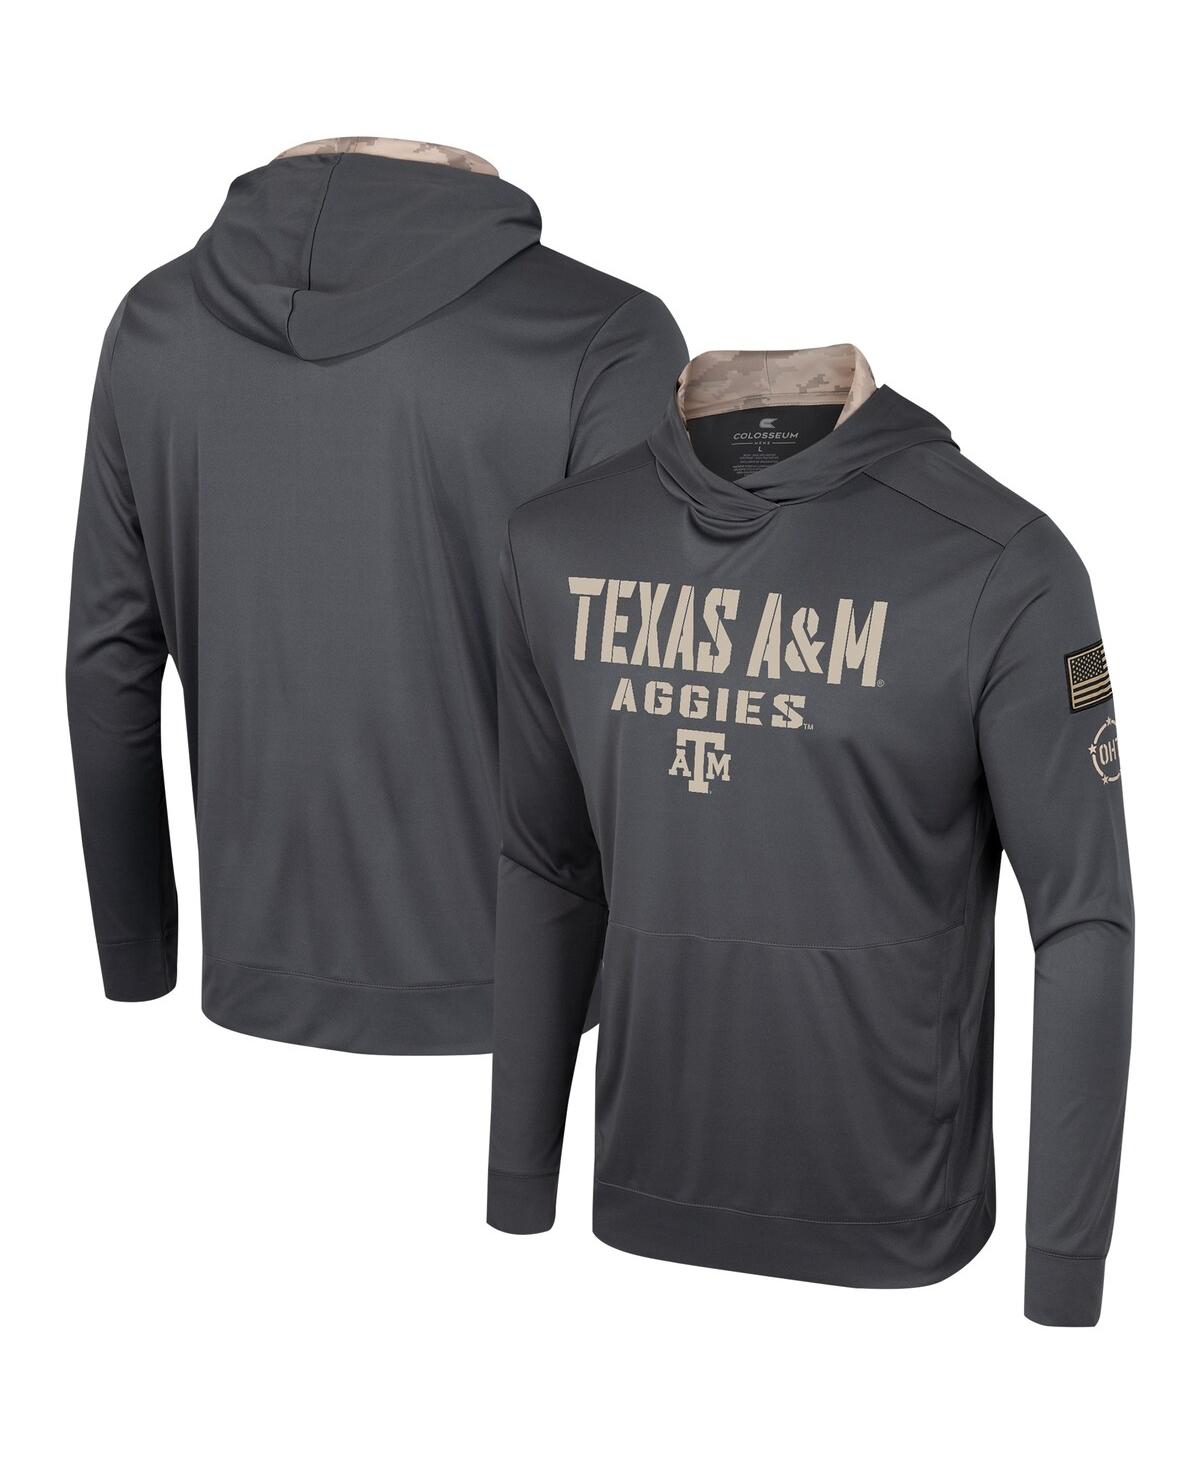 Men's Colosseum Charcoal Texas A&M Aggies Oht Military-Inspired Appreciation Long Sleeve Hoodie T-shirt - Charcoal